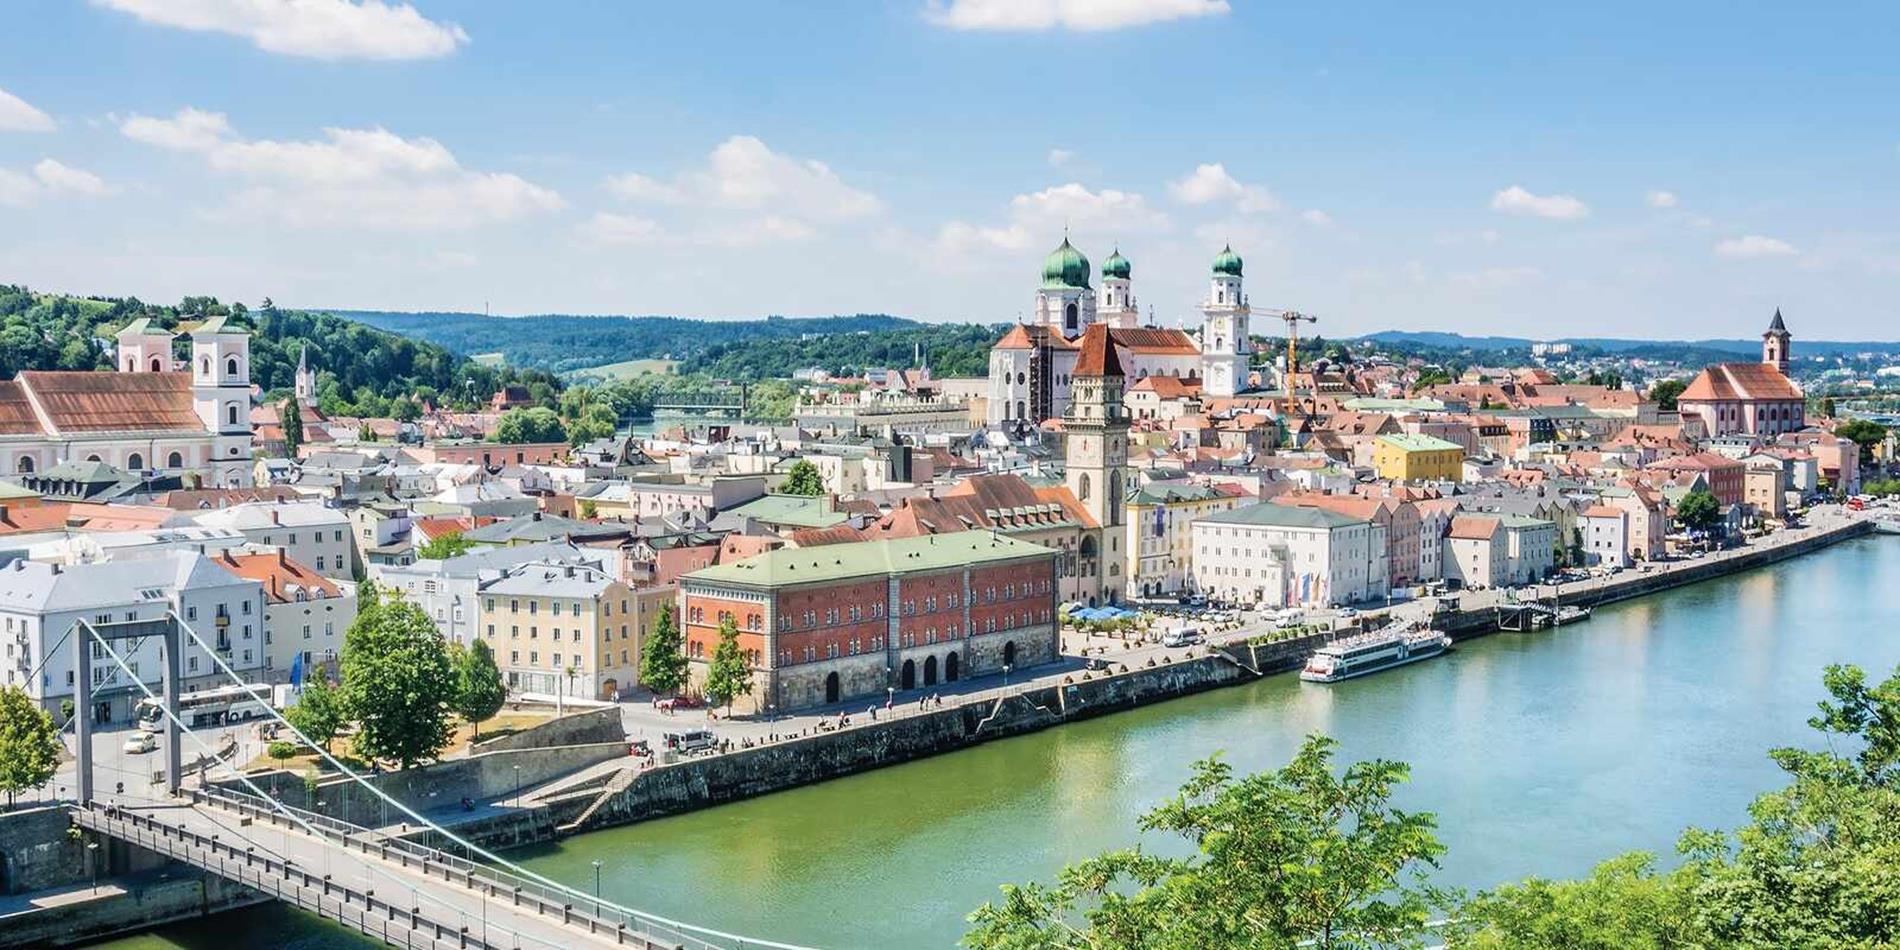 View of city of Passau from riverbank, Germany